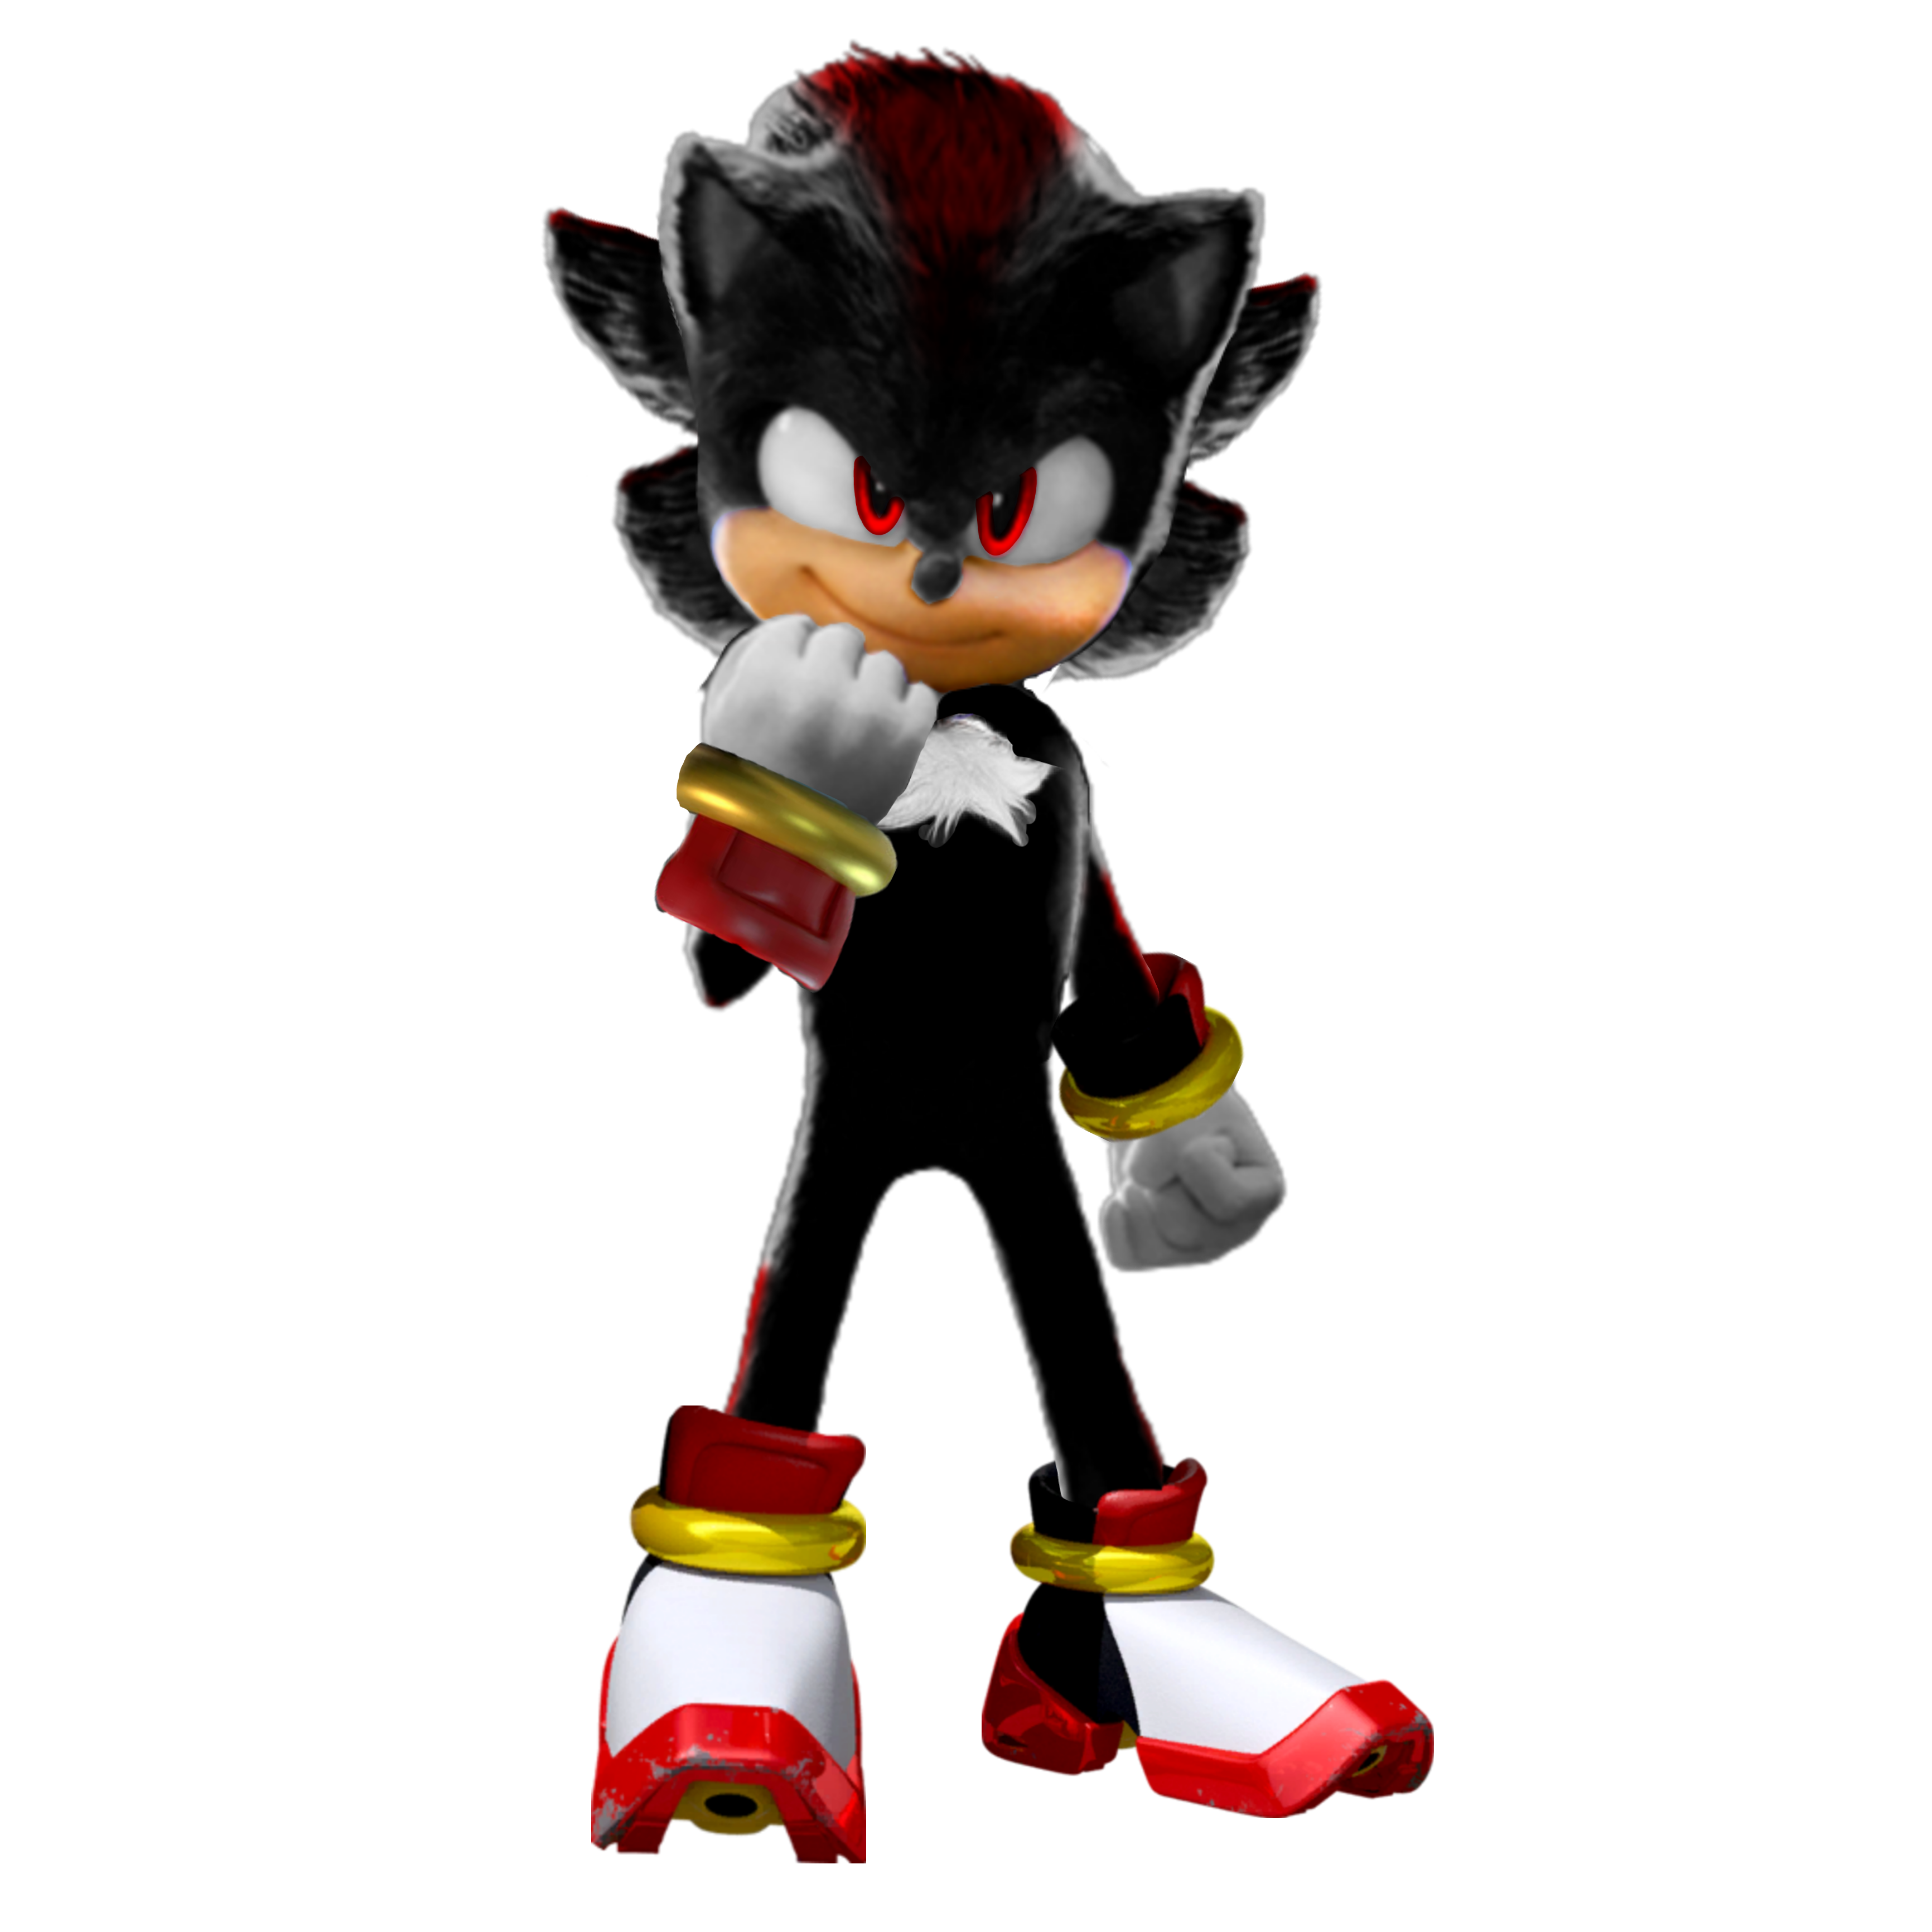 Sonic Movie PNG HD Image - PNG All